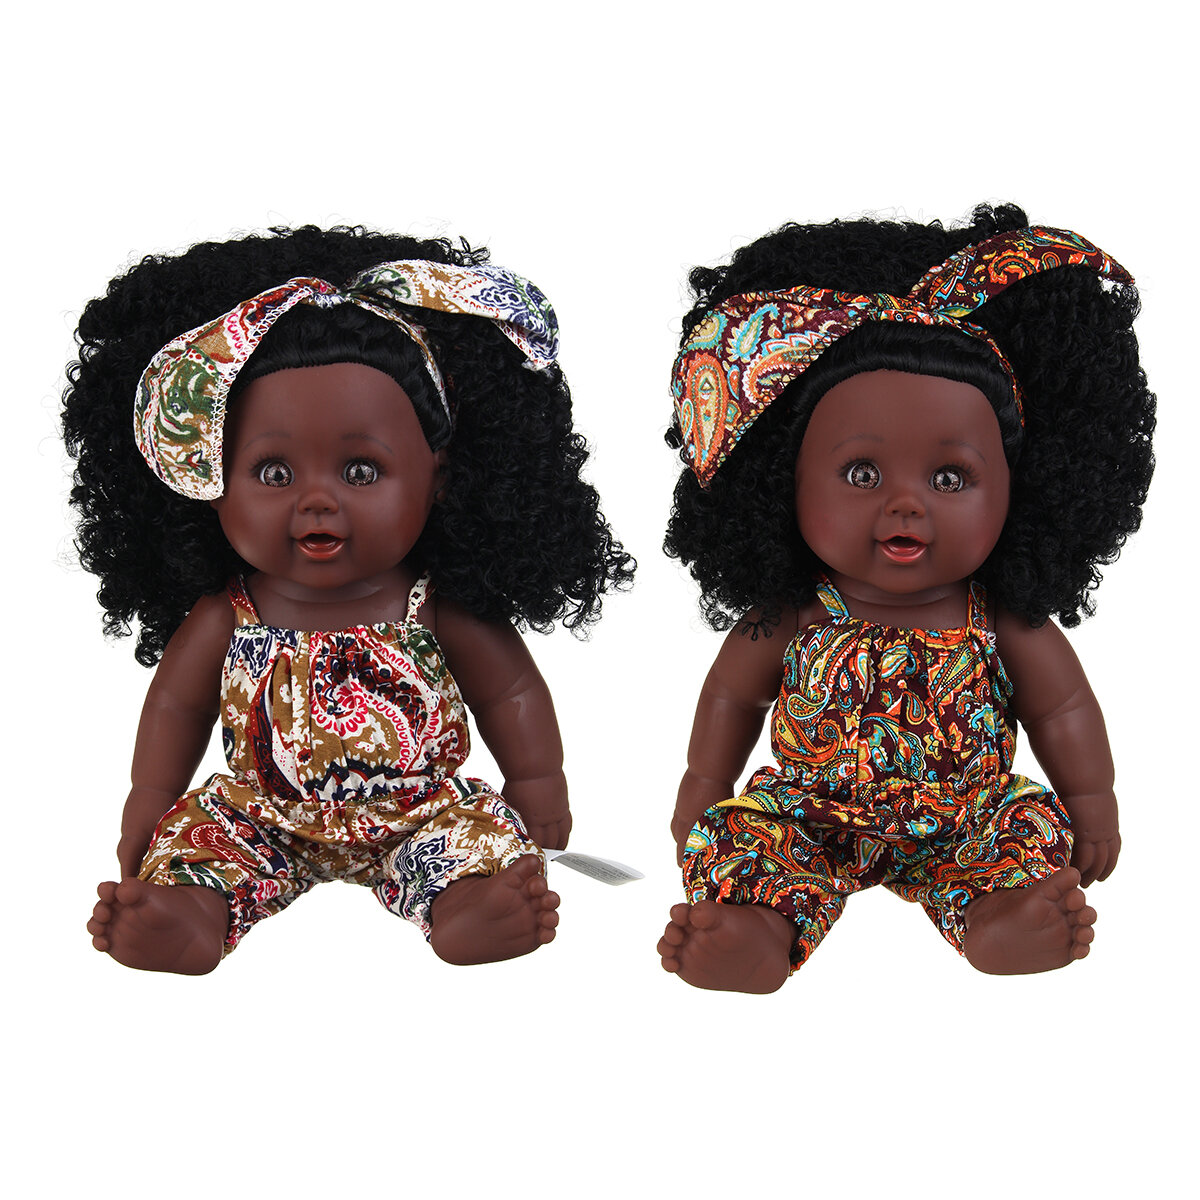 30CM Silicone Vinyl African Girl Realistic Reborn Lifelike Newborn Baby Doll Toy with 360° Moveable Head Arms and Legs f